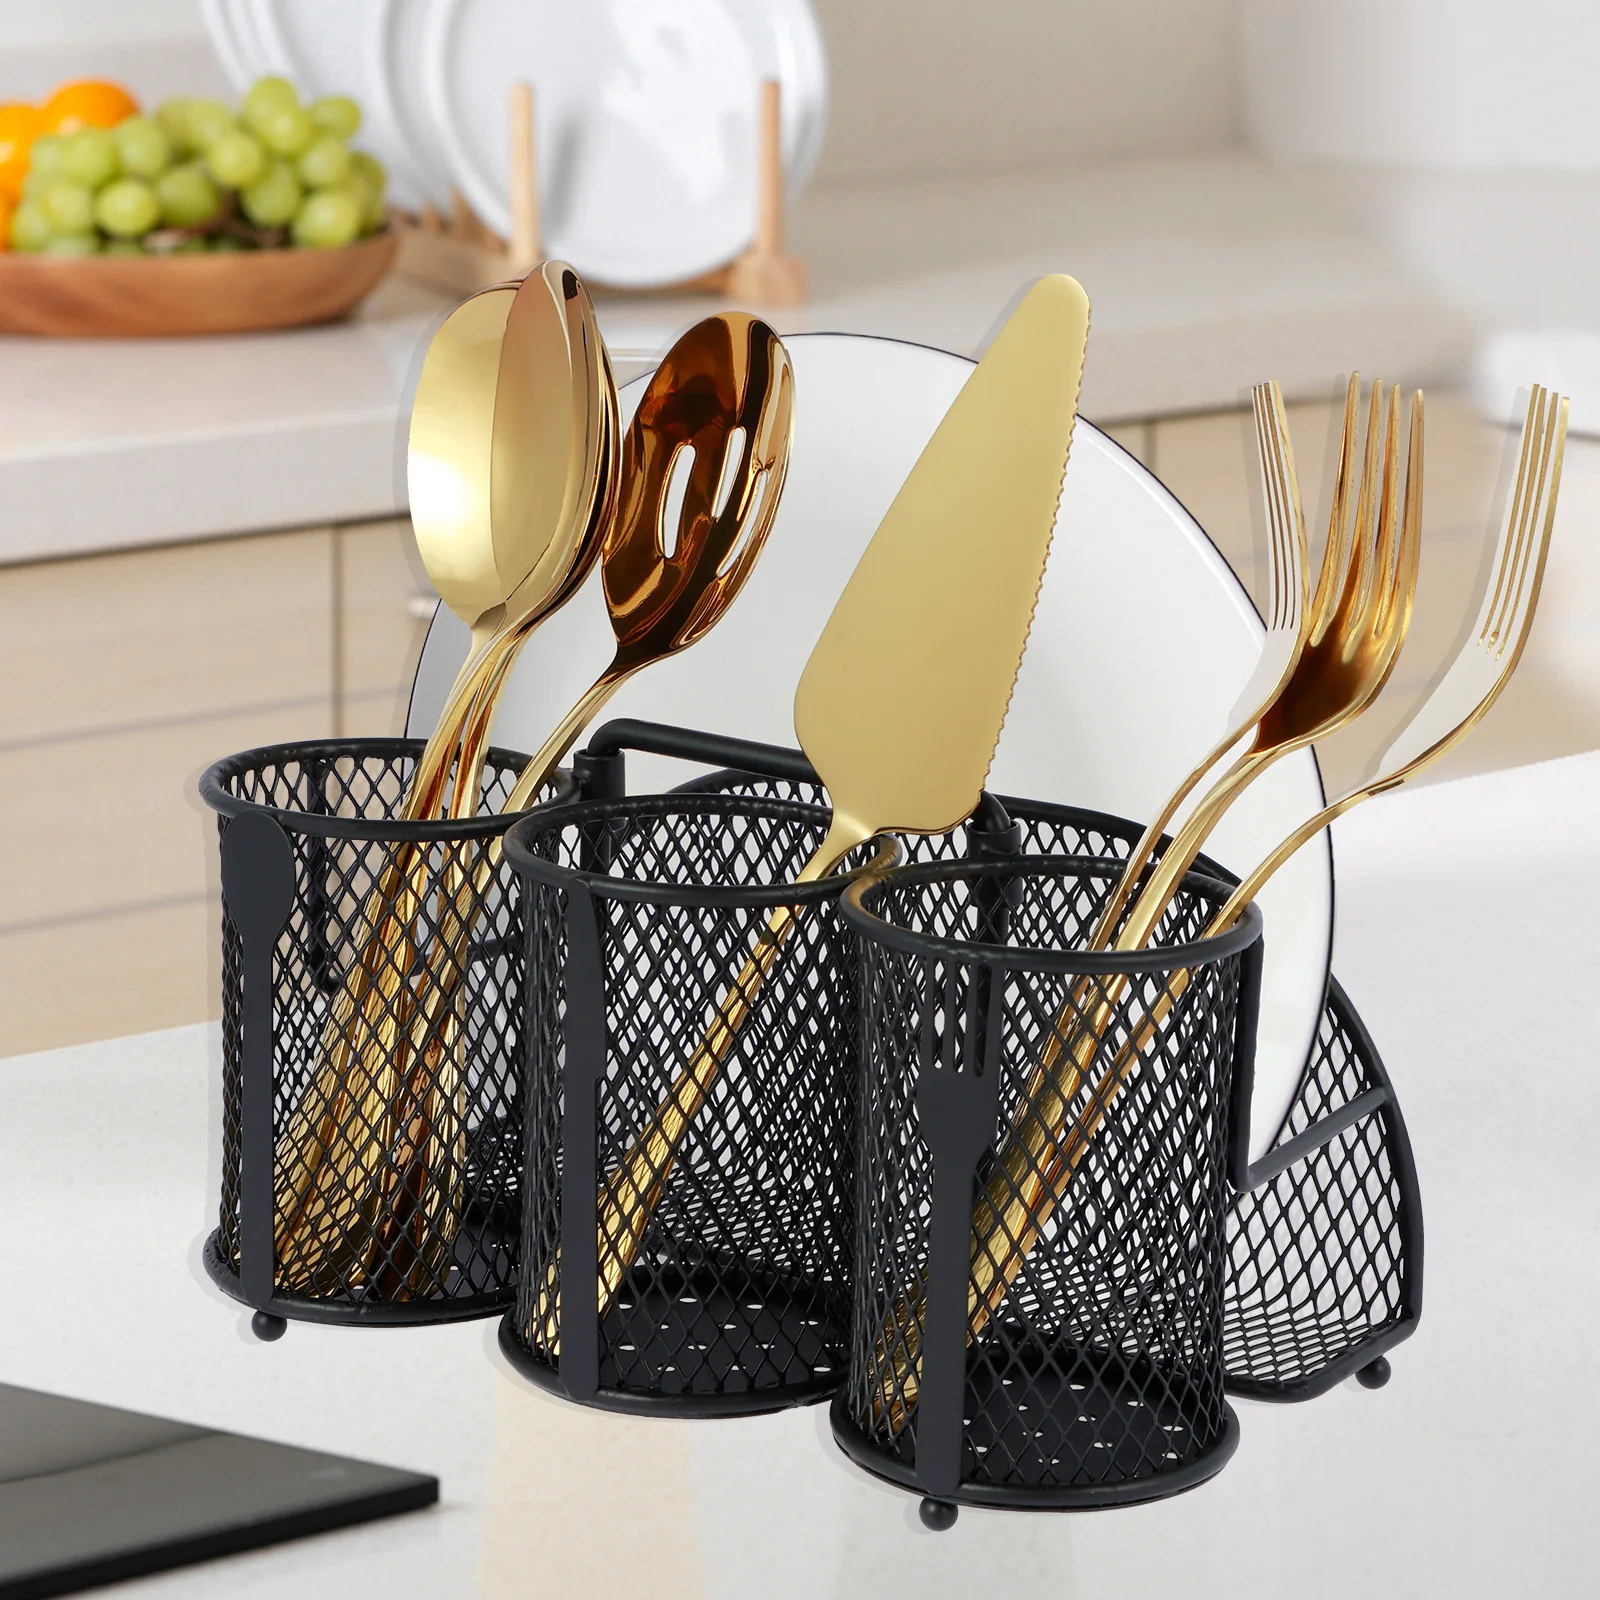 

Metal Utensil Caddy Mesh Silverware Caddy 4 Compartments Flatware Caddy with Retractable Handle Cutlery Caddy with Weighted Base